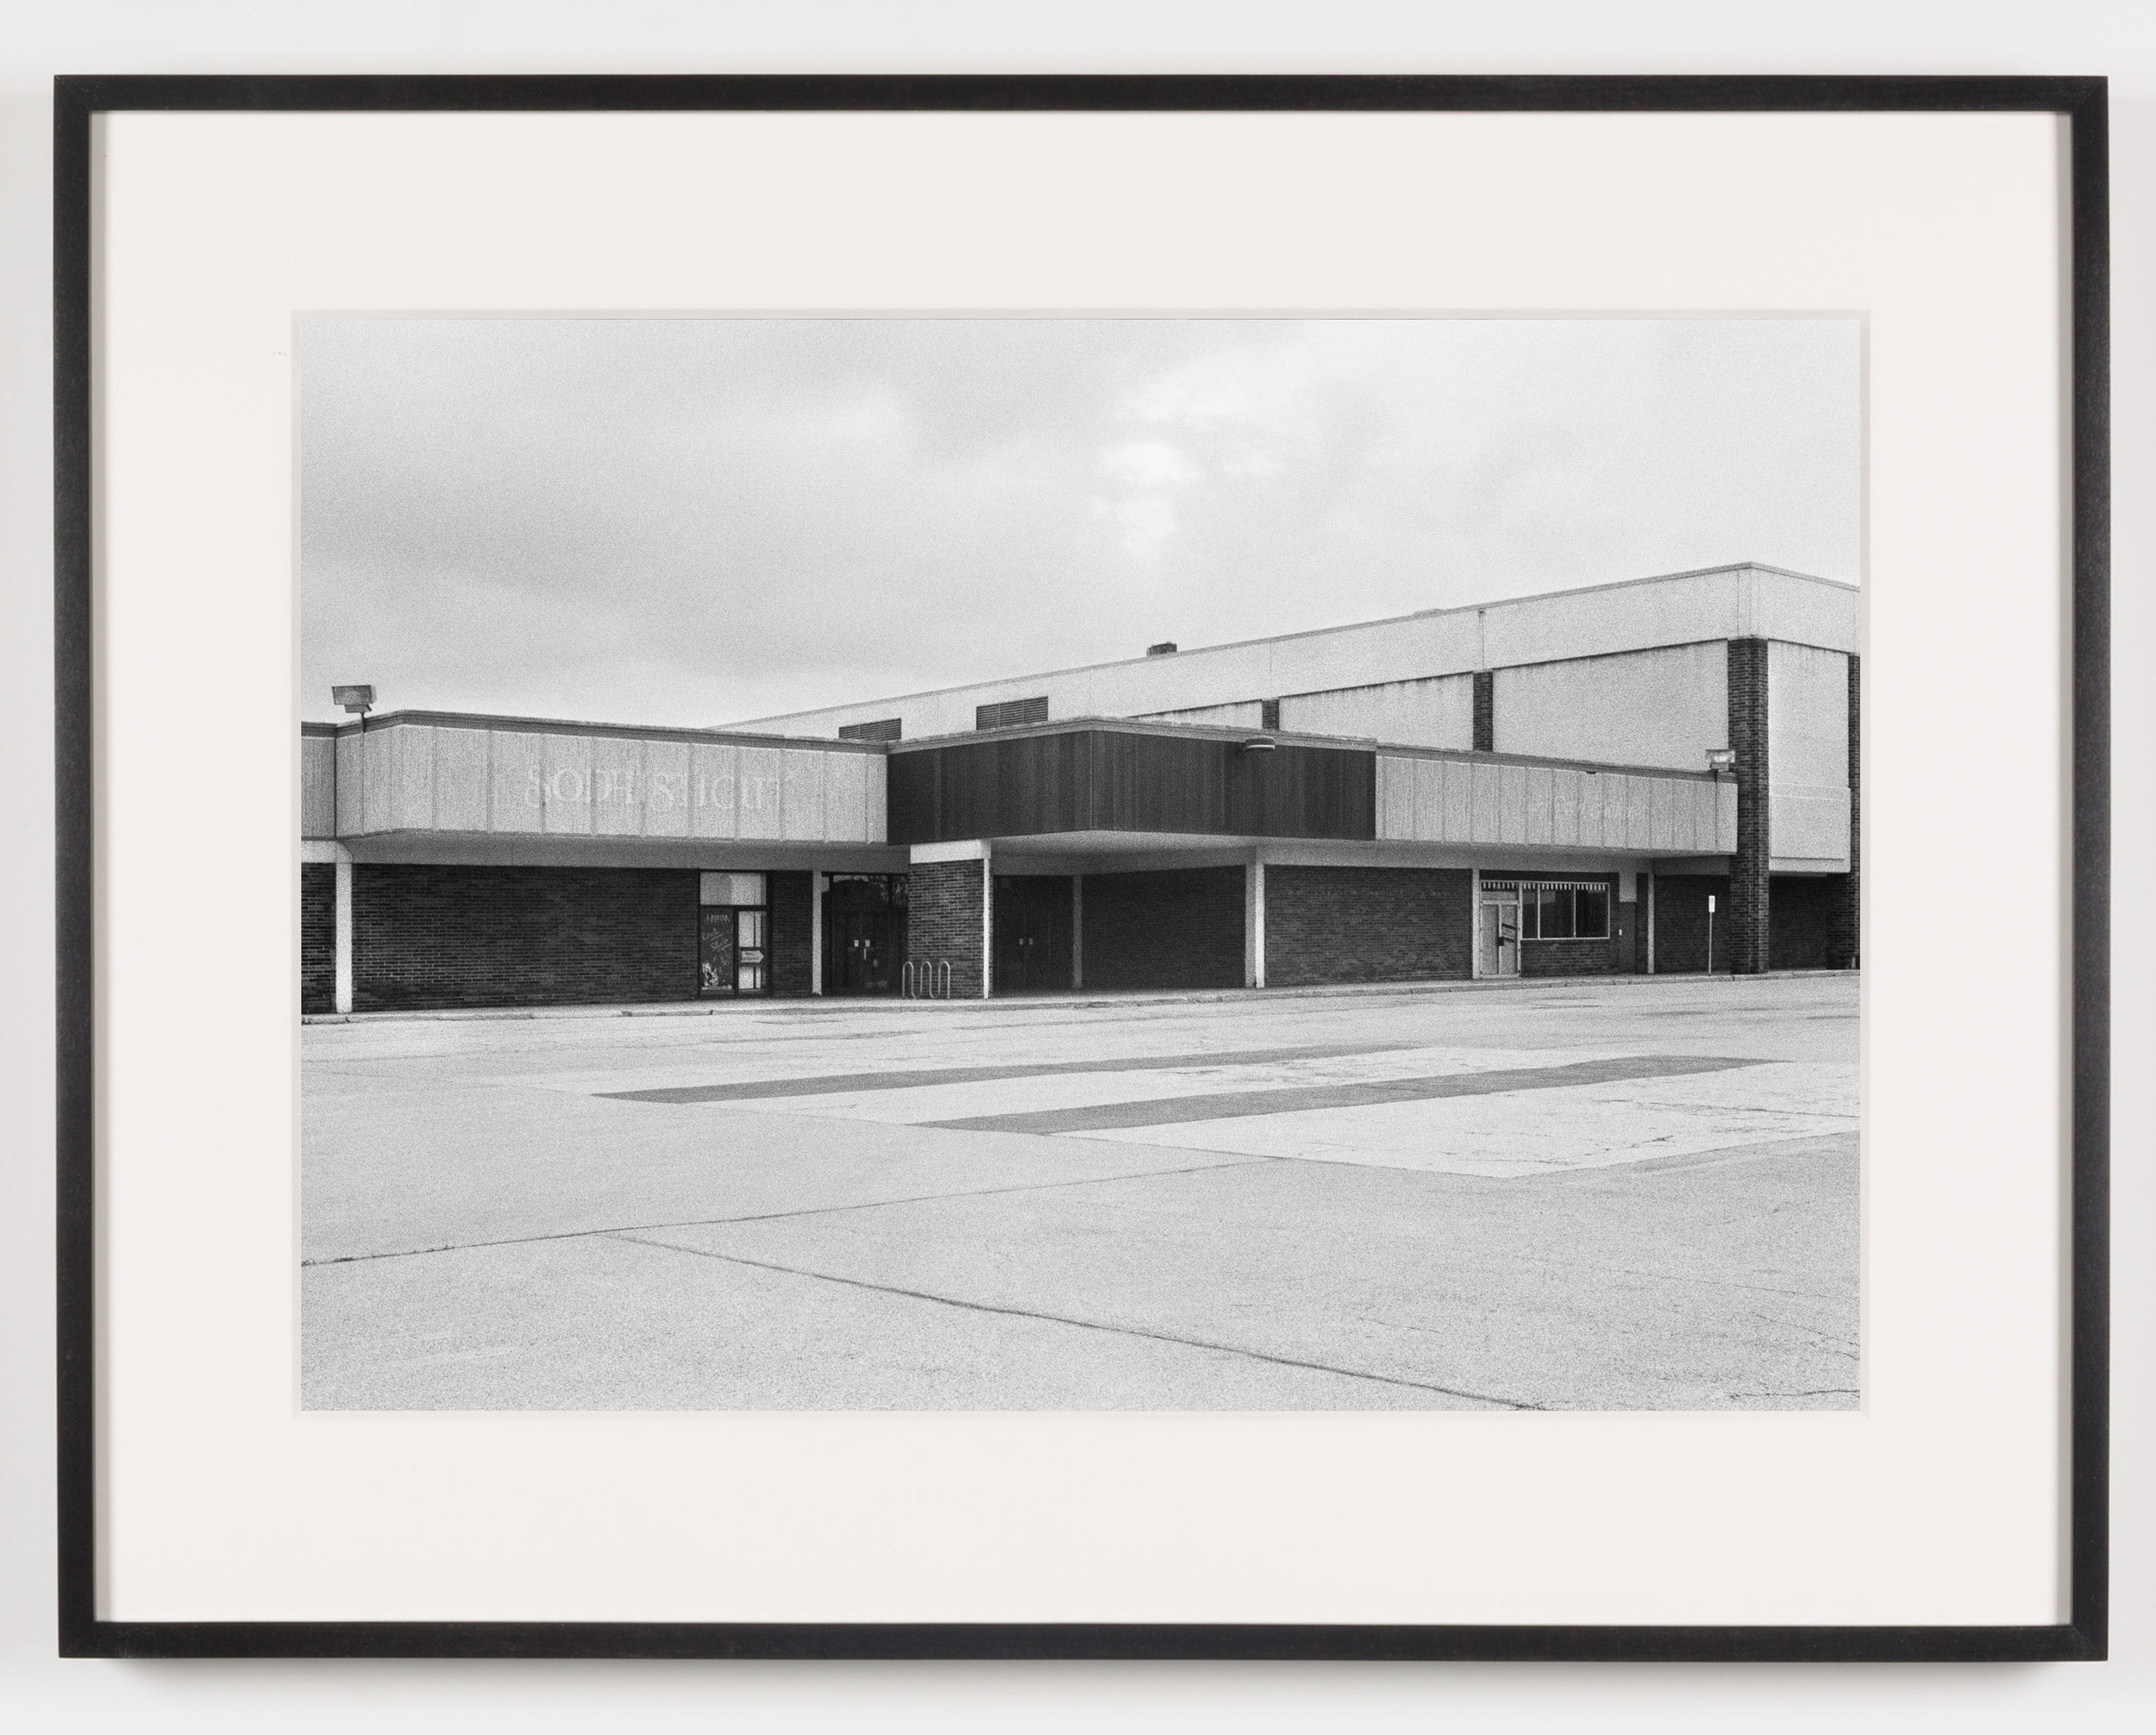   Southwyck Mall ('Sophisticut'), Toledo, OH, Est. 1972, Demo. 2009    2011   Epson Ultrachrome K3 archival ink jet print on Hahnemühle Photo Rag paper  21 5/8 x 28 1/8 inches   American Passages, 2001–2011     